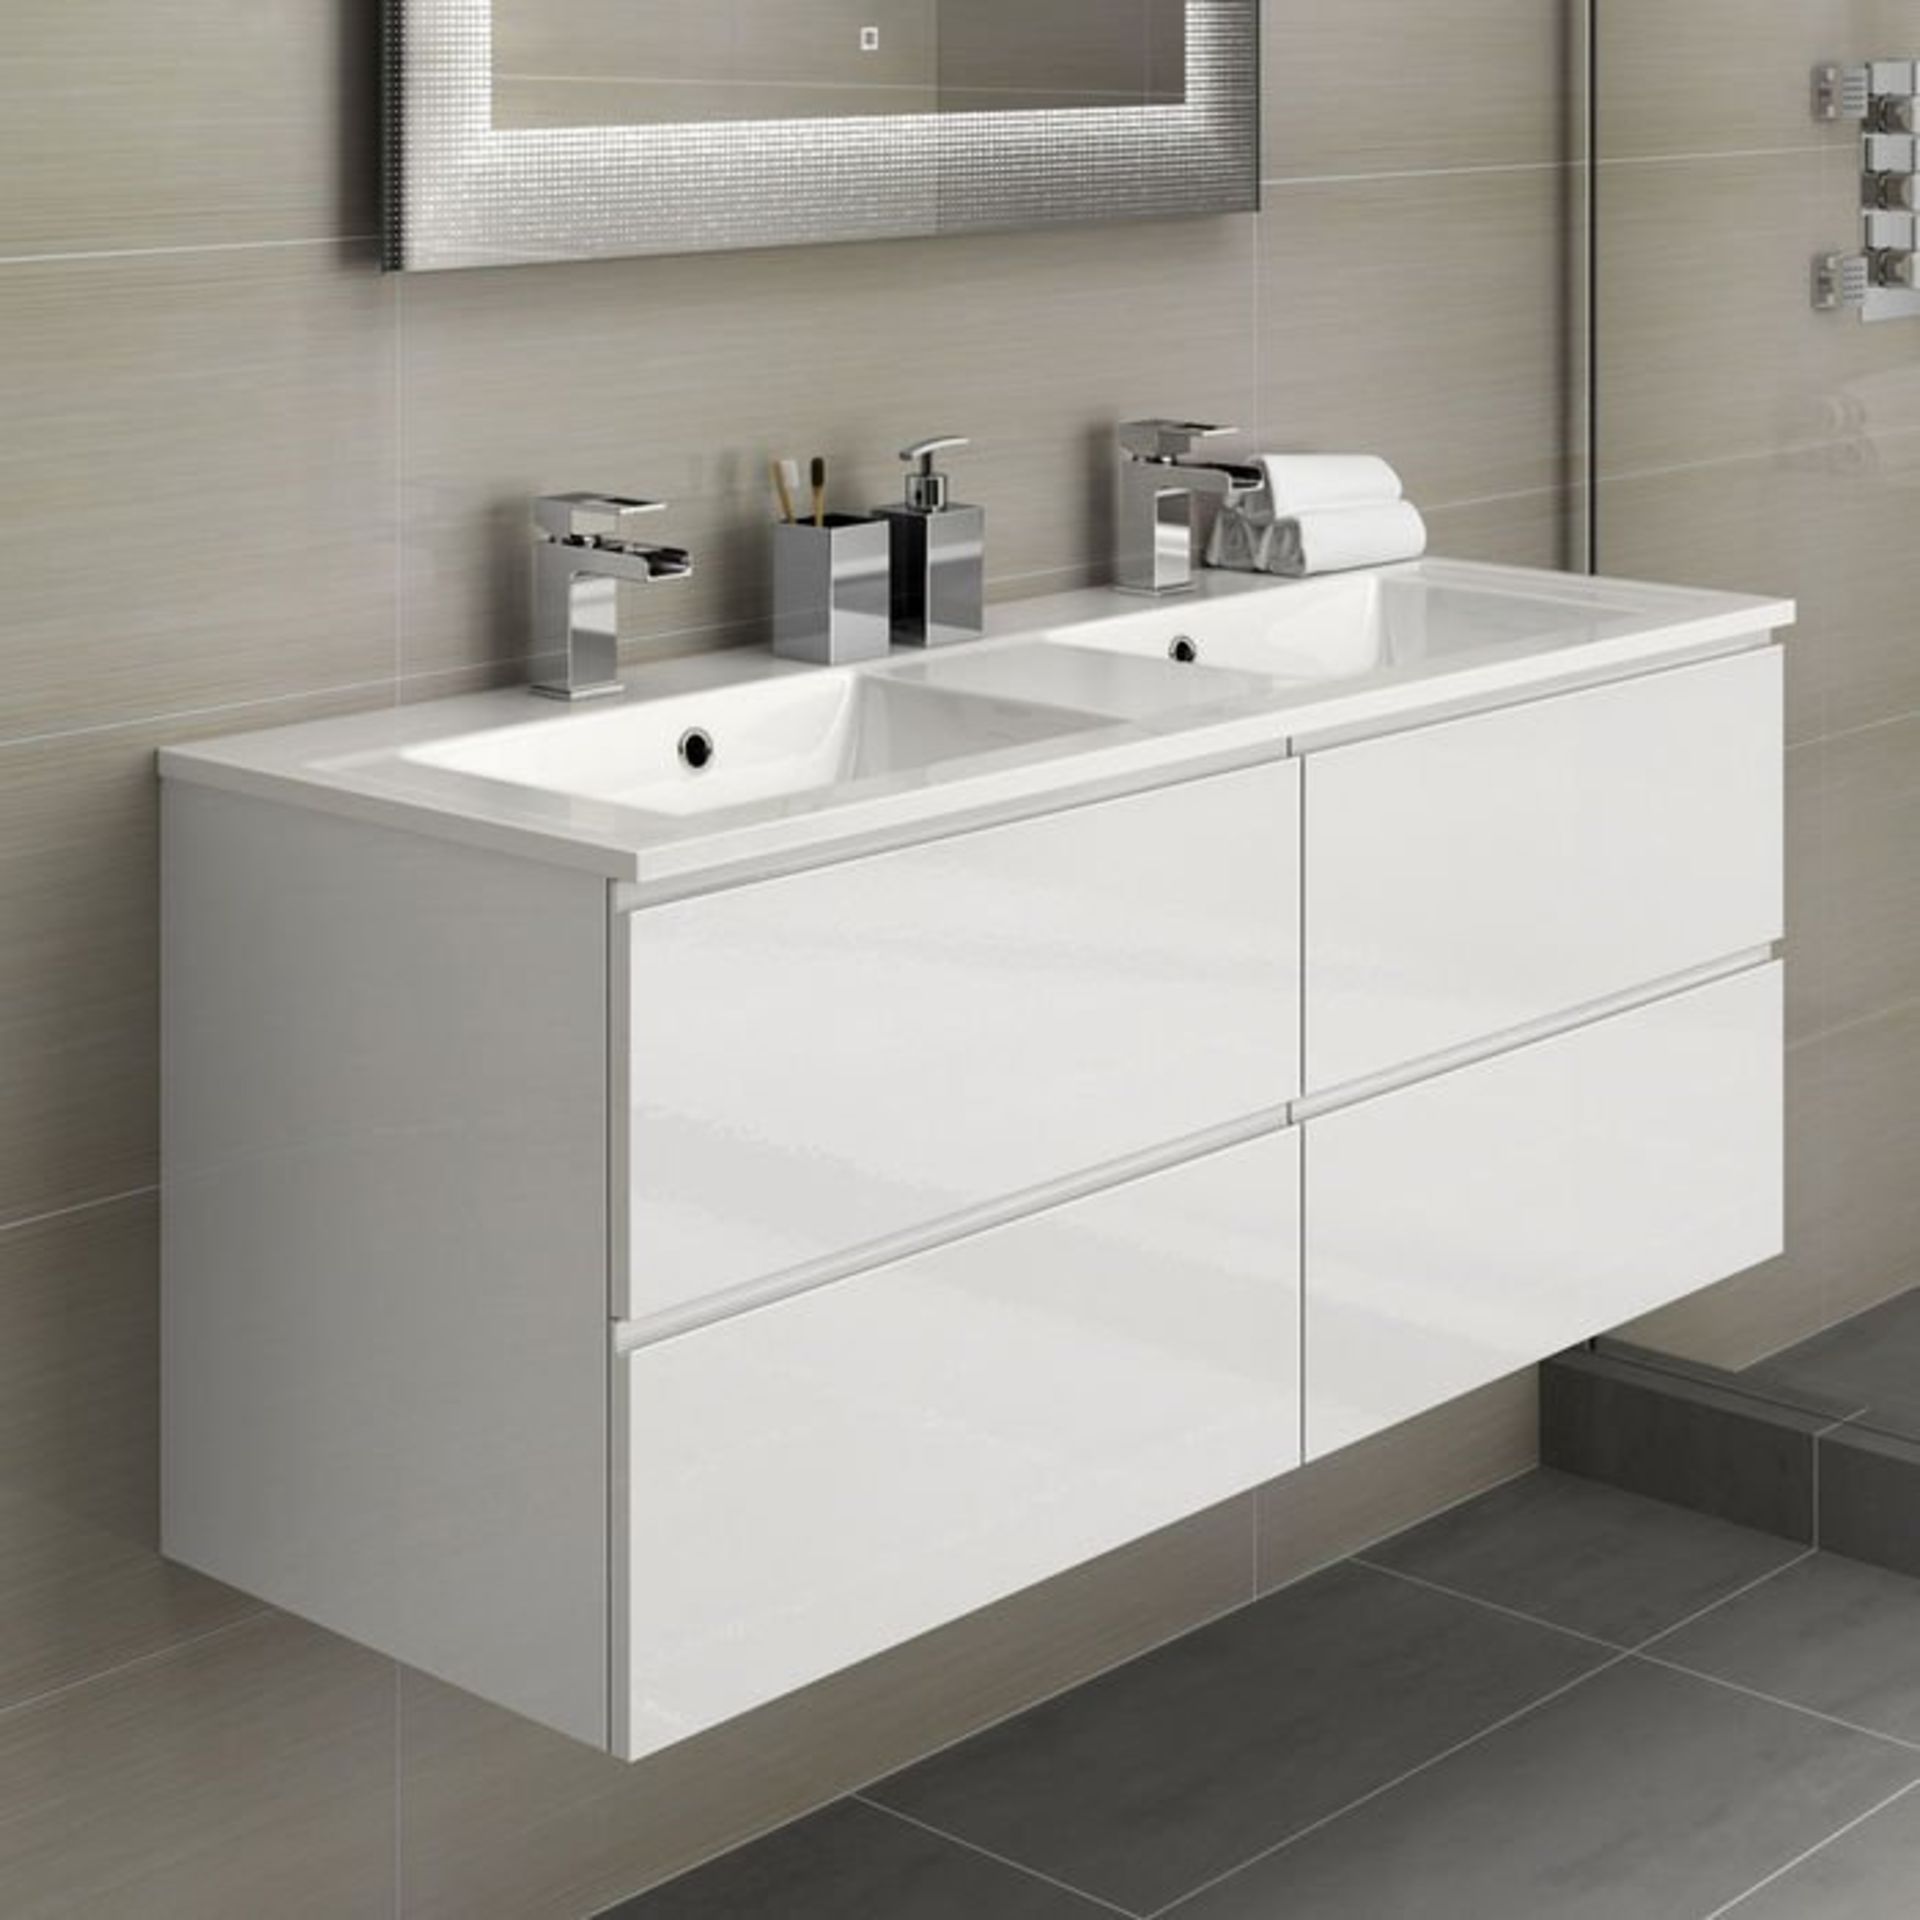 1200mm Trevia High Gloss White Double Basin Cabinet - Wall Hung. Comes Complete With Basin. Con...